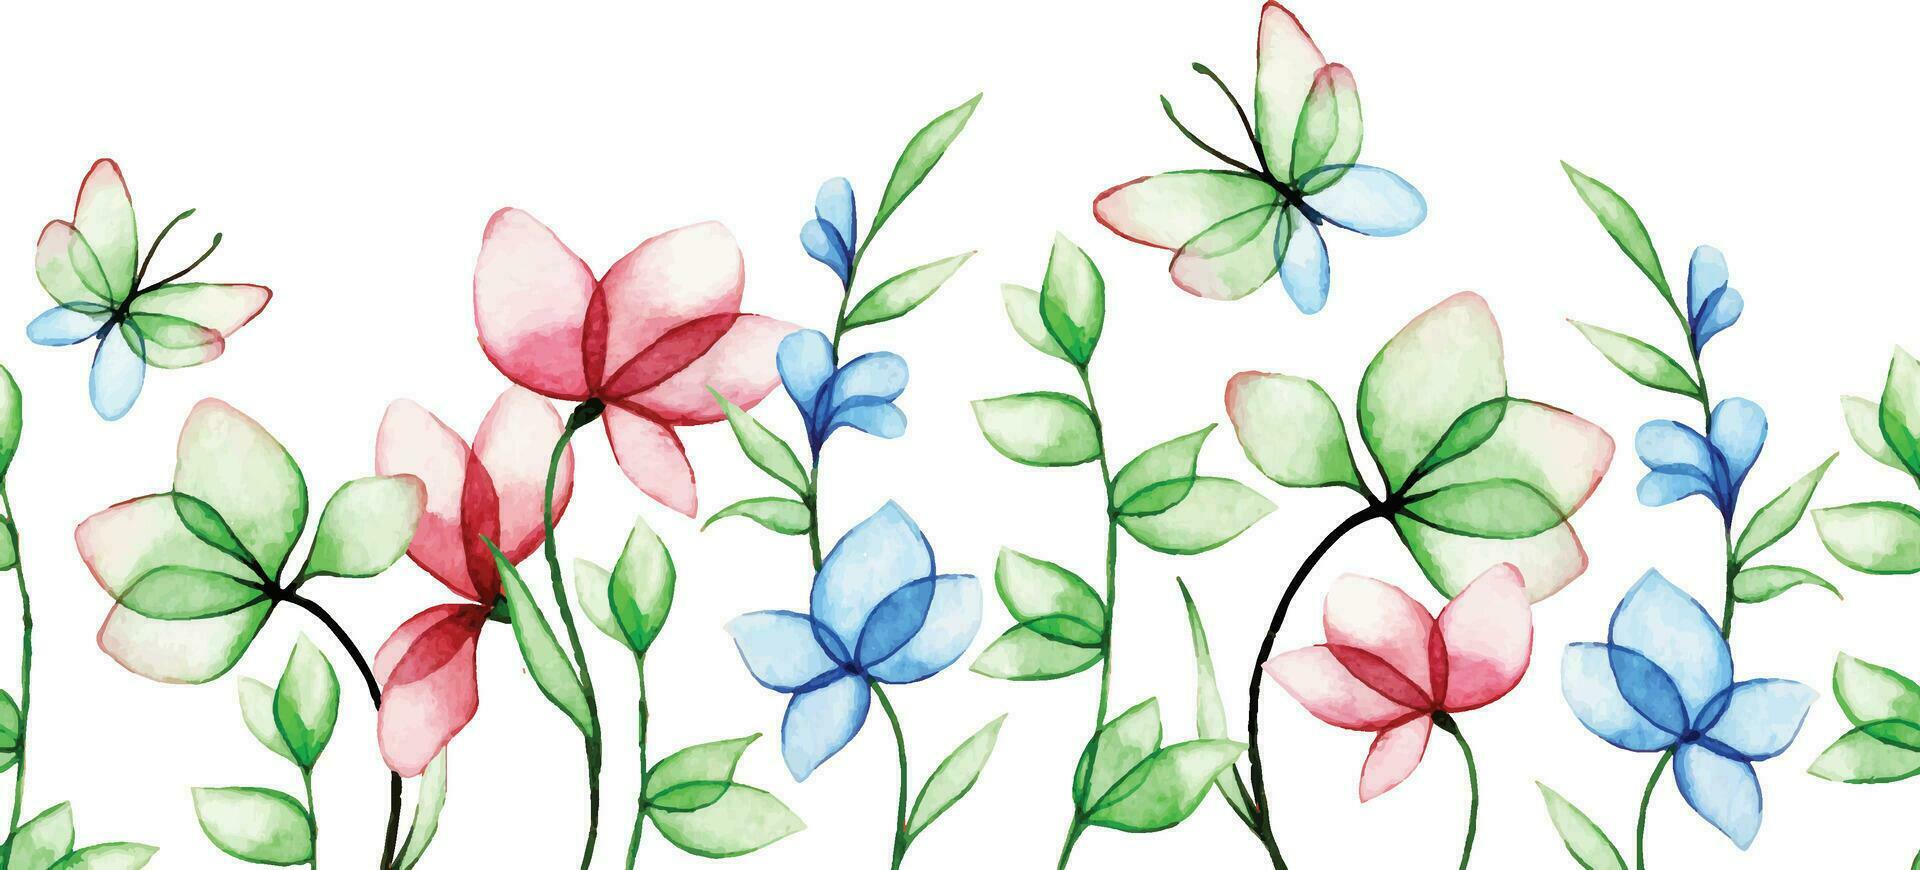 watercolor drawing, seamless horizontal border with transparent flowers and leaves. abstract plants in blue and pink. vector